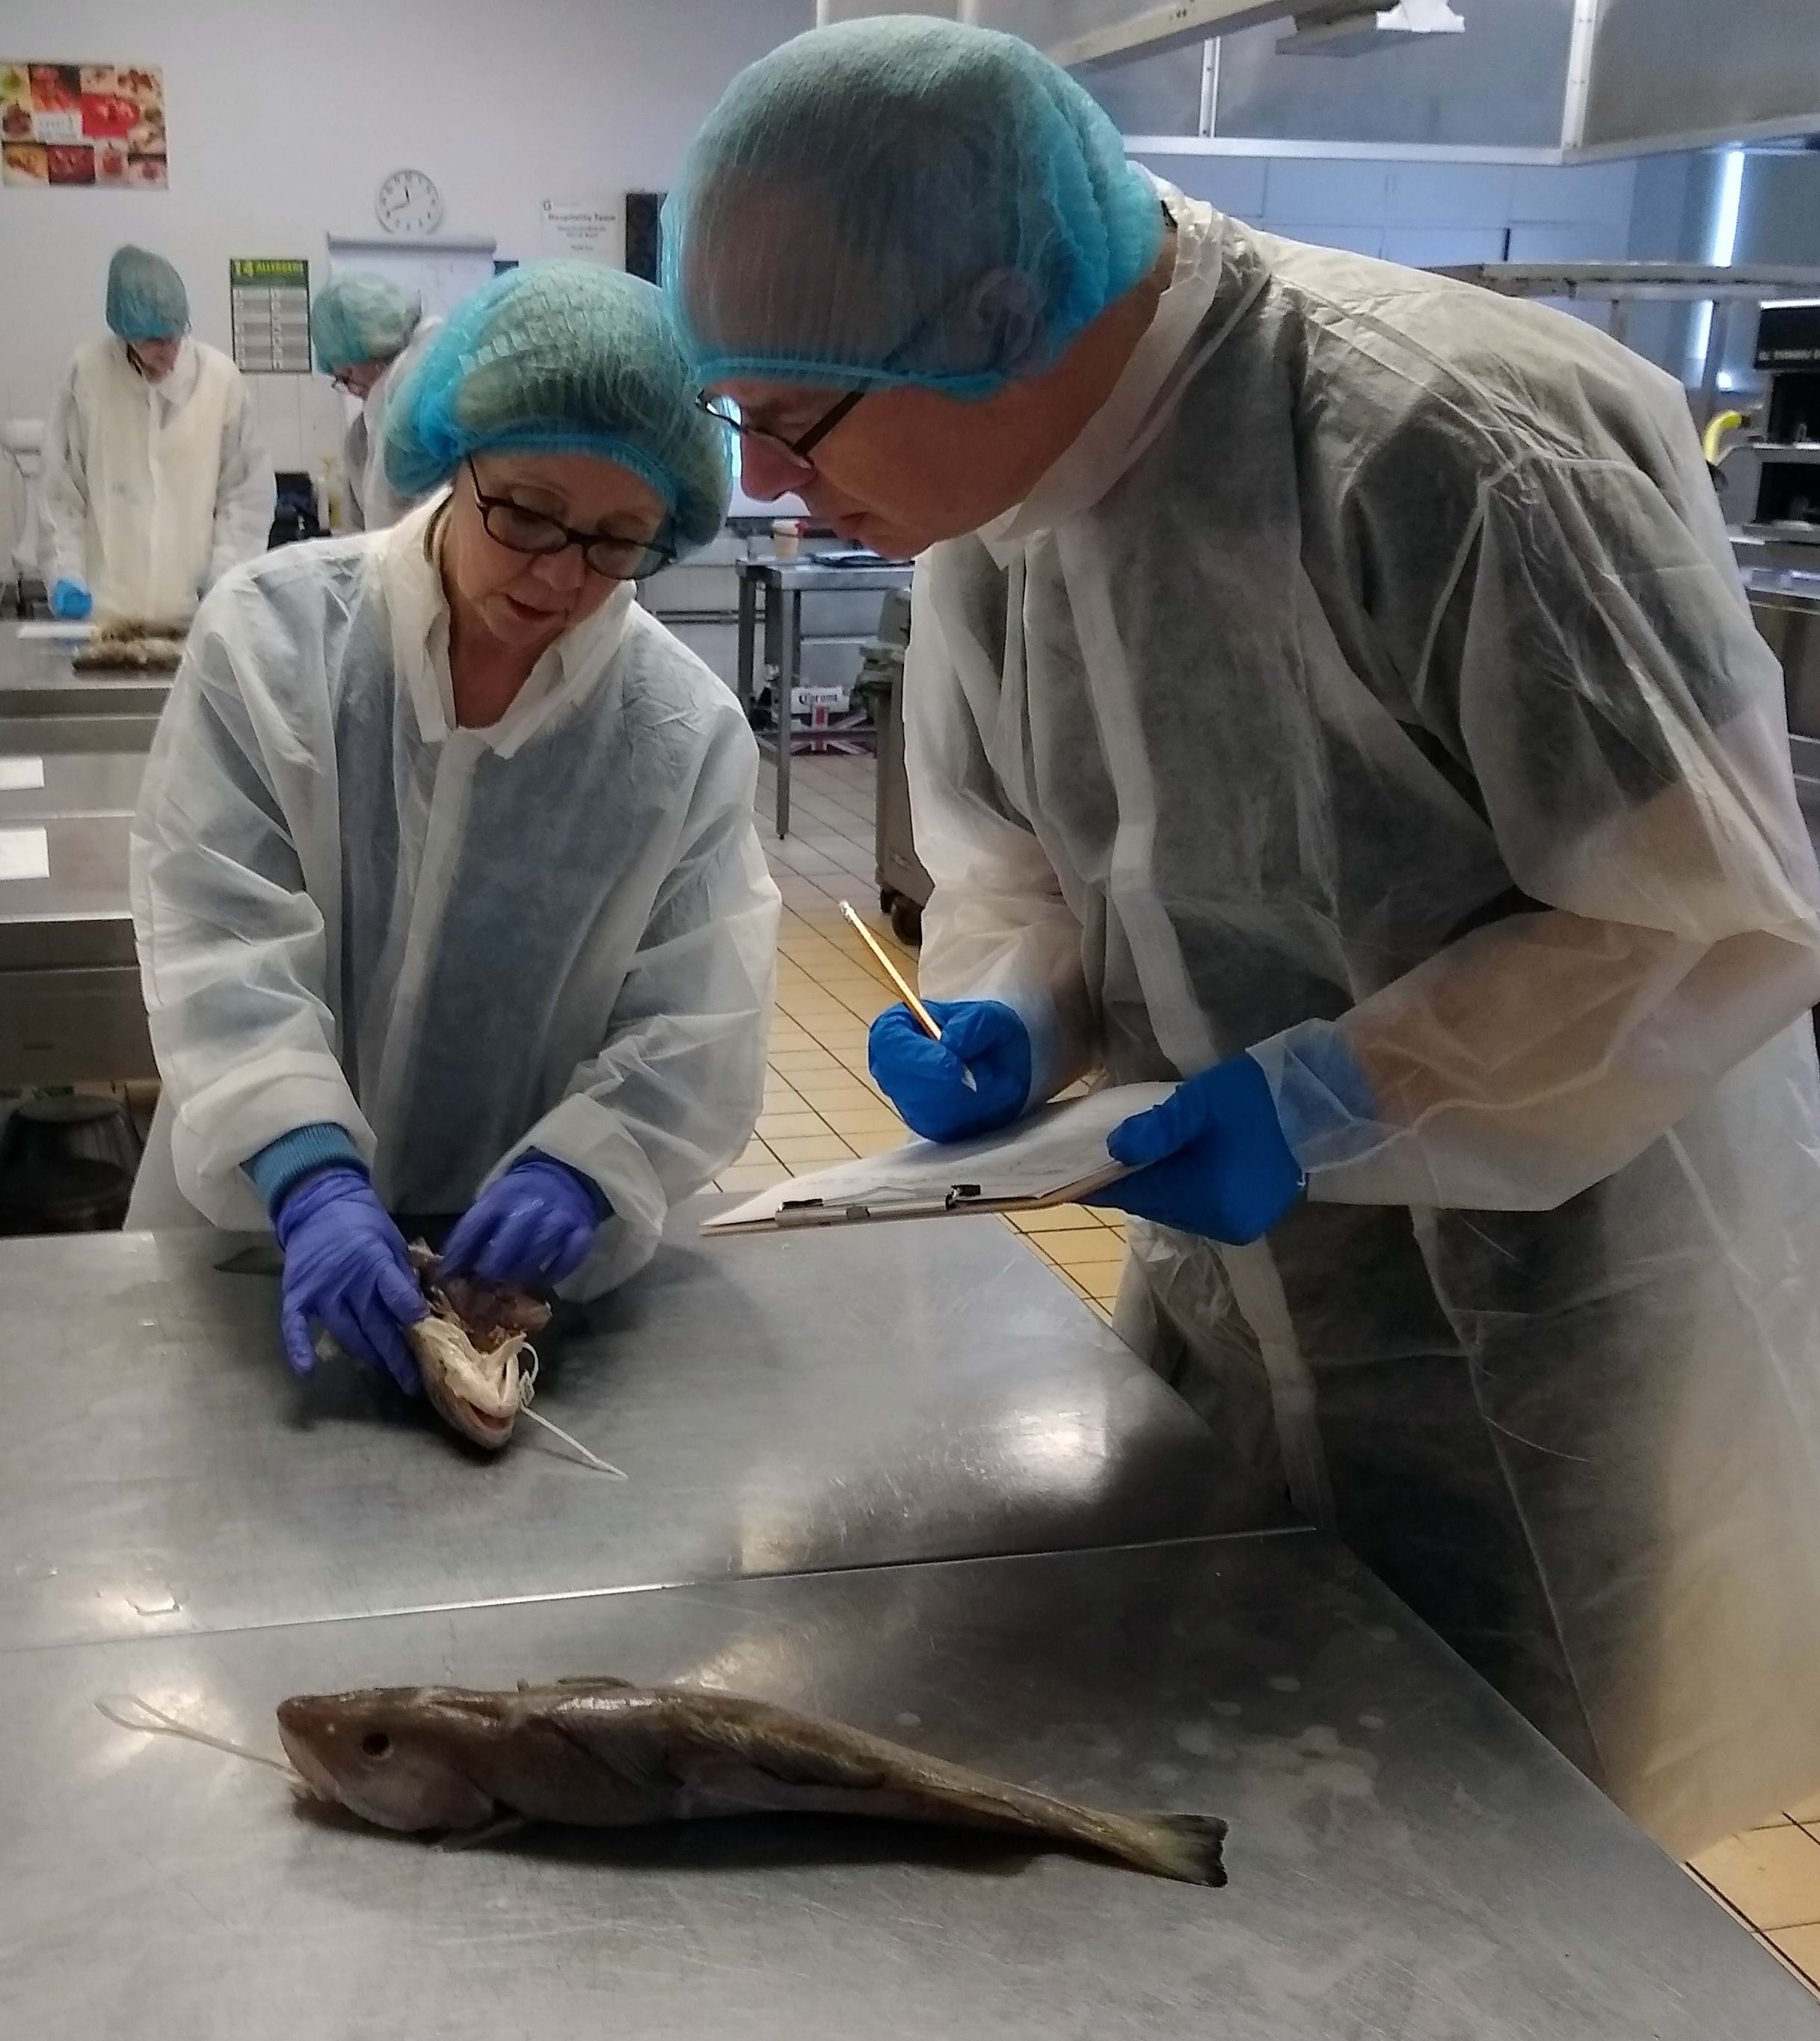 Two trainees inspecting a fish on a work surface during a training session